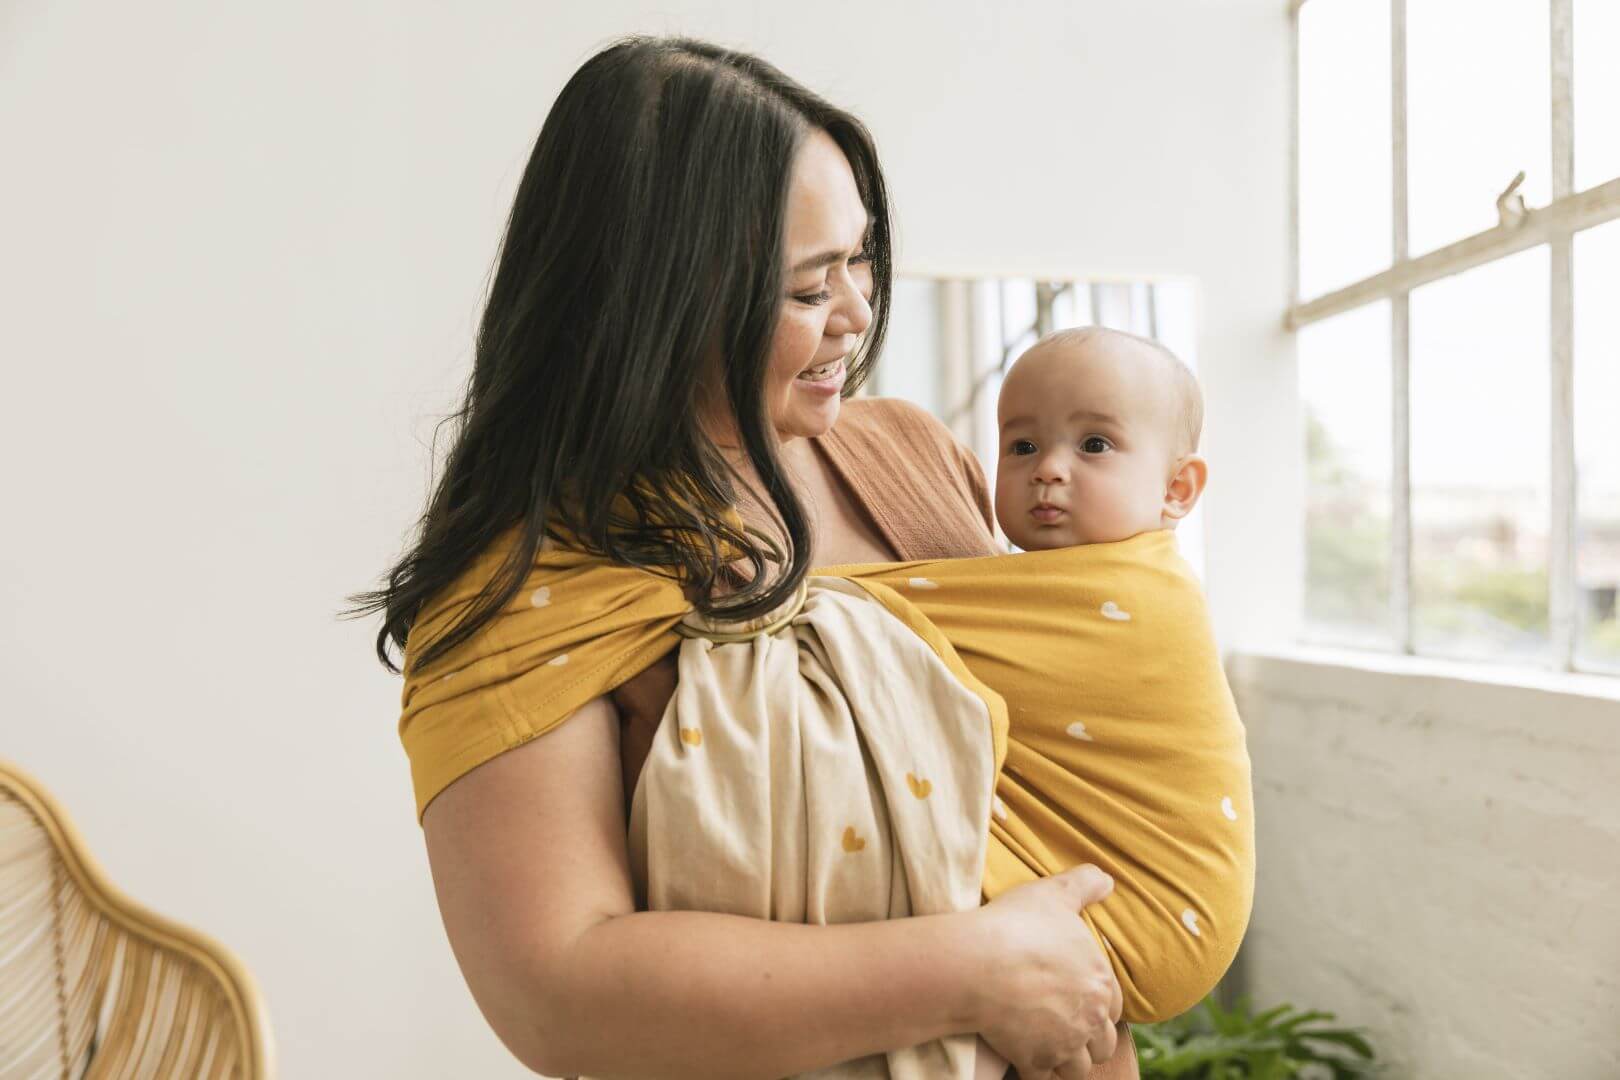 Curious baby in an ergonomic baby sling carrier.